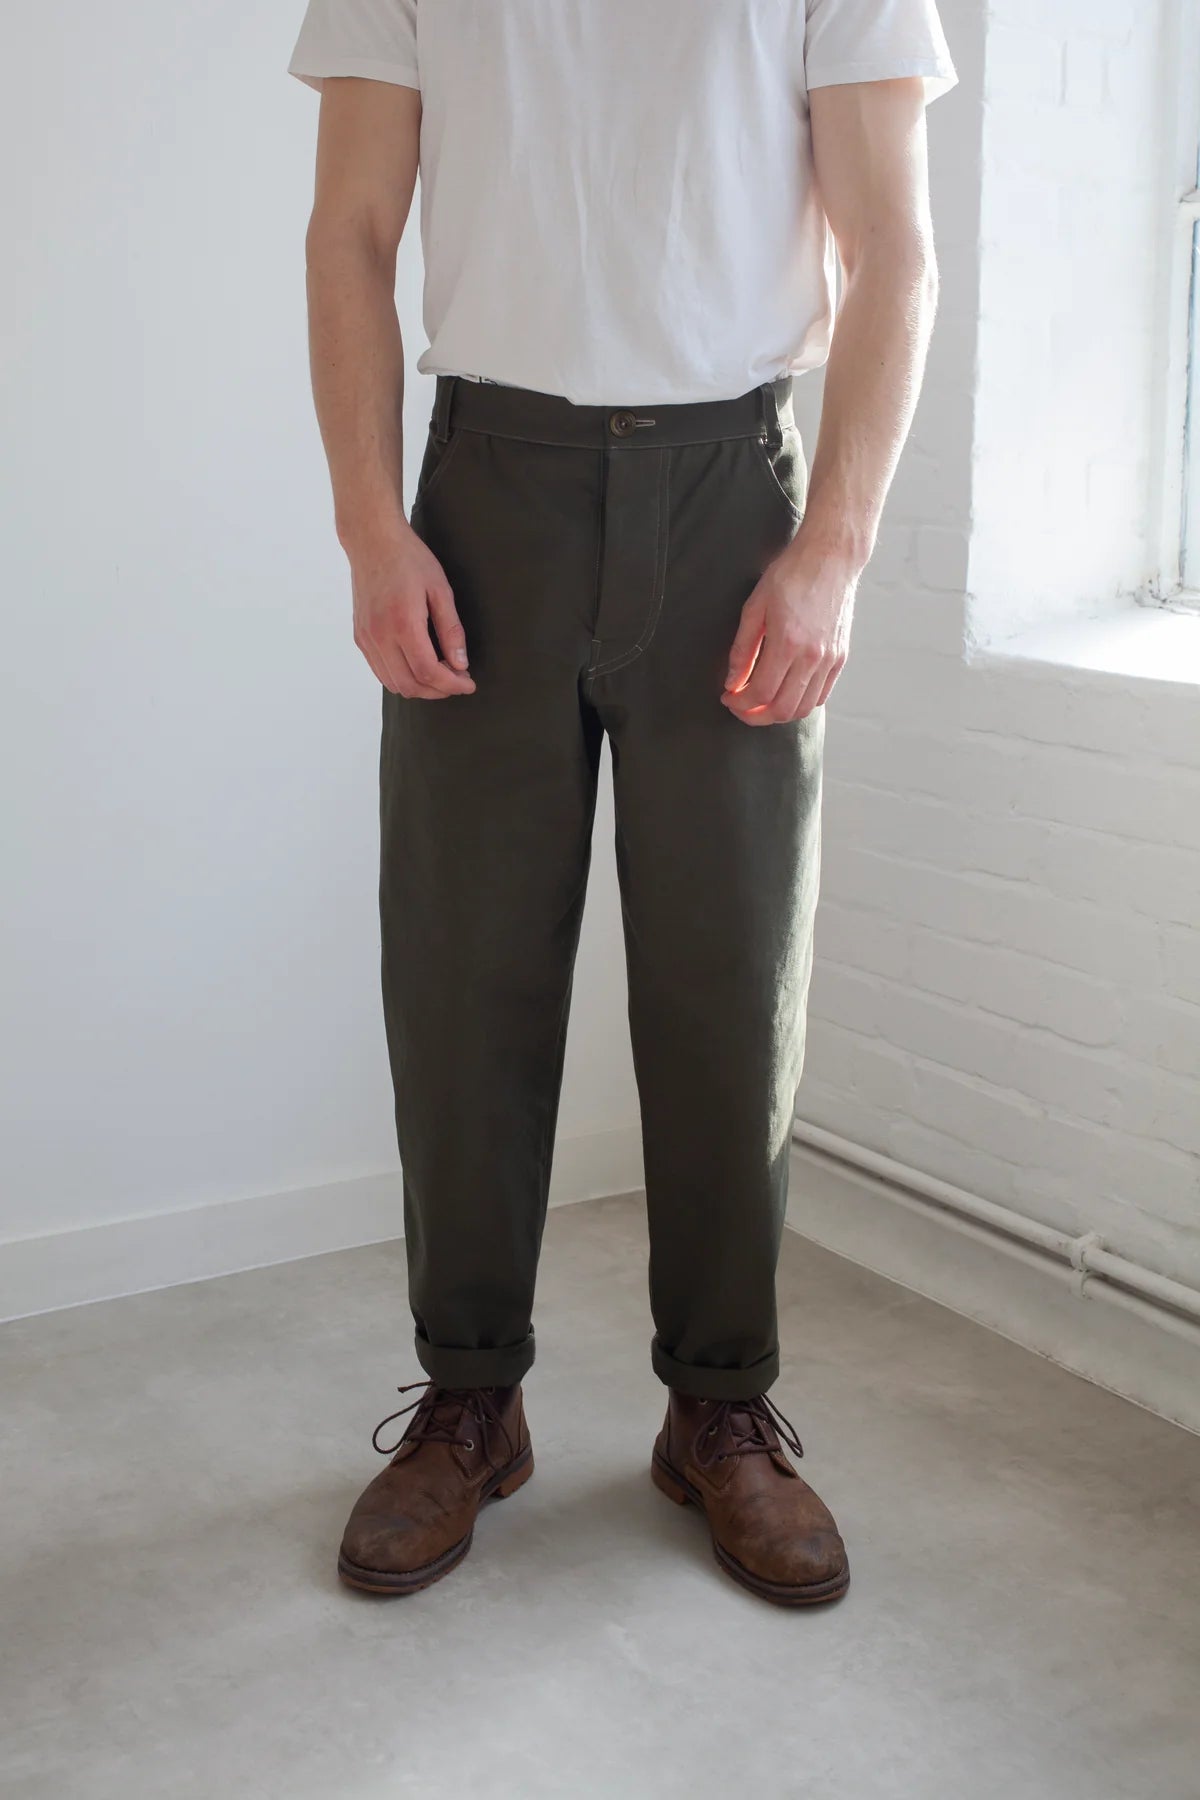 The Modern Sewing Co. Men's Worker Trousers